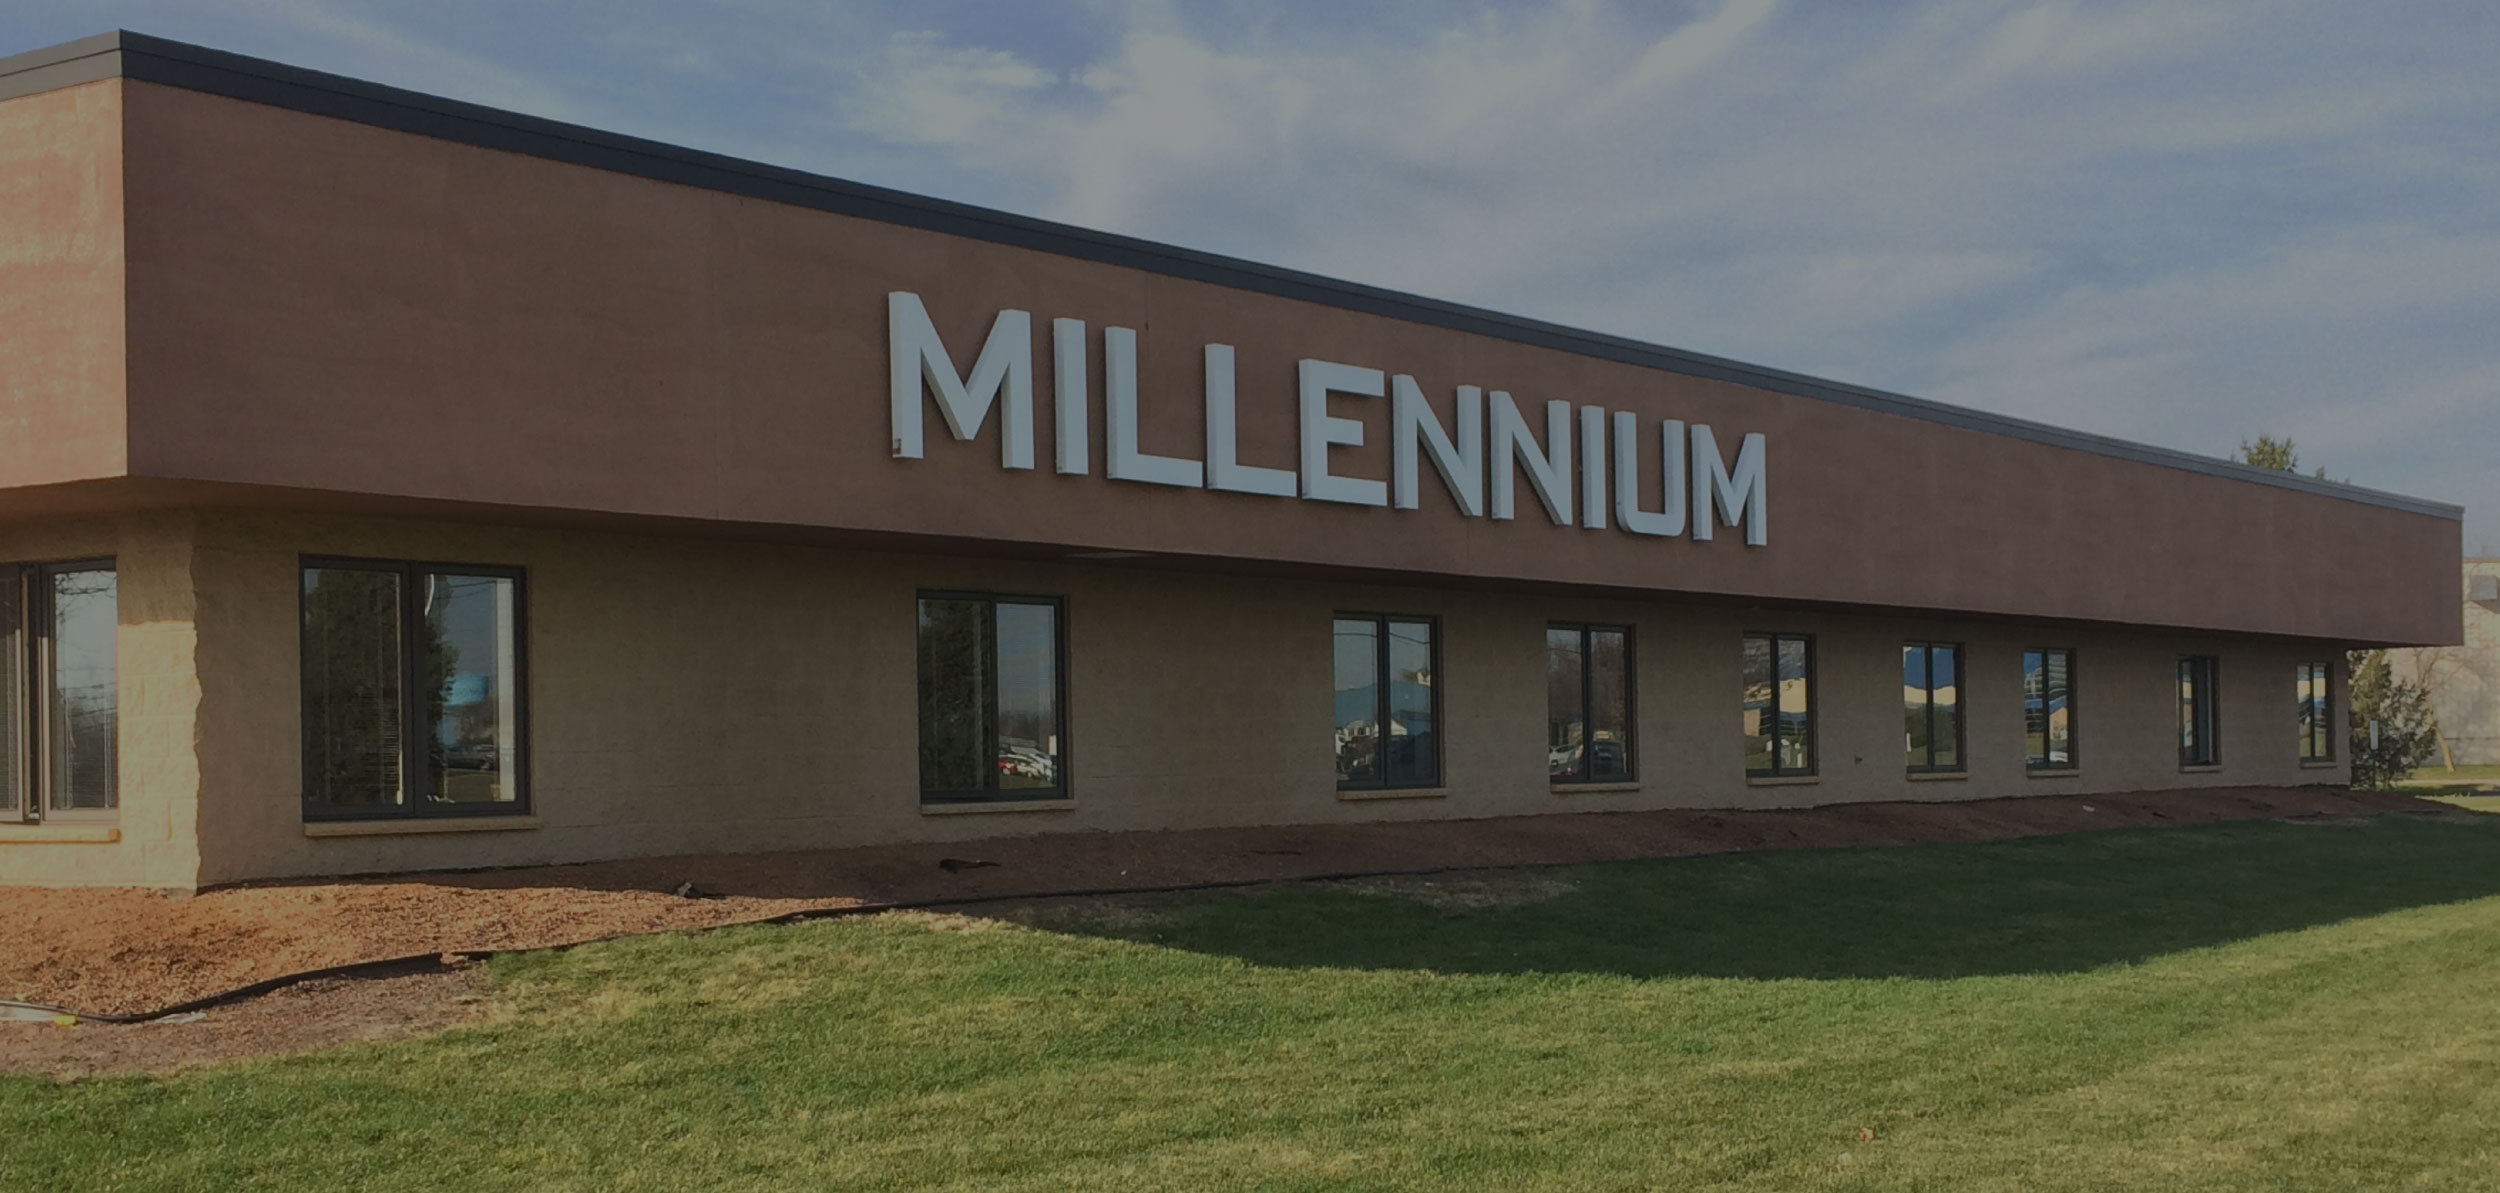 EY Announces James Kyle of Millennium as an Entrepreneur Of The Year® 2022 Midwest Award Recipient